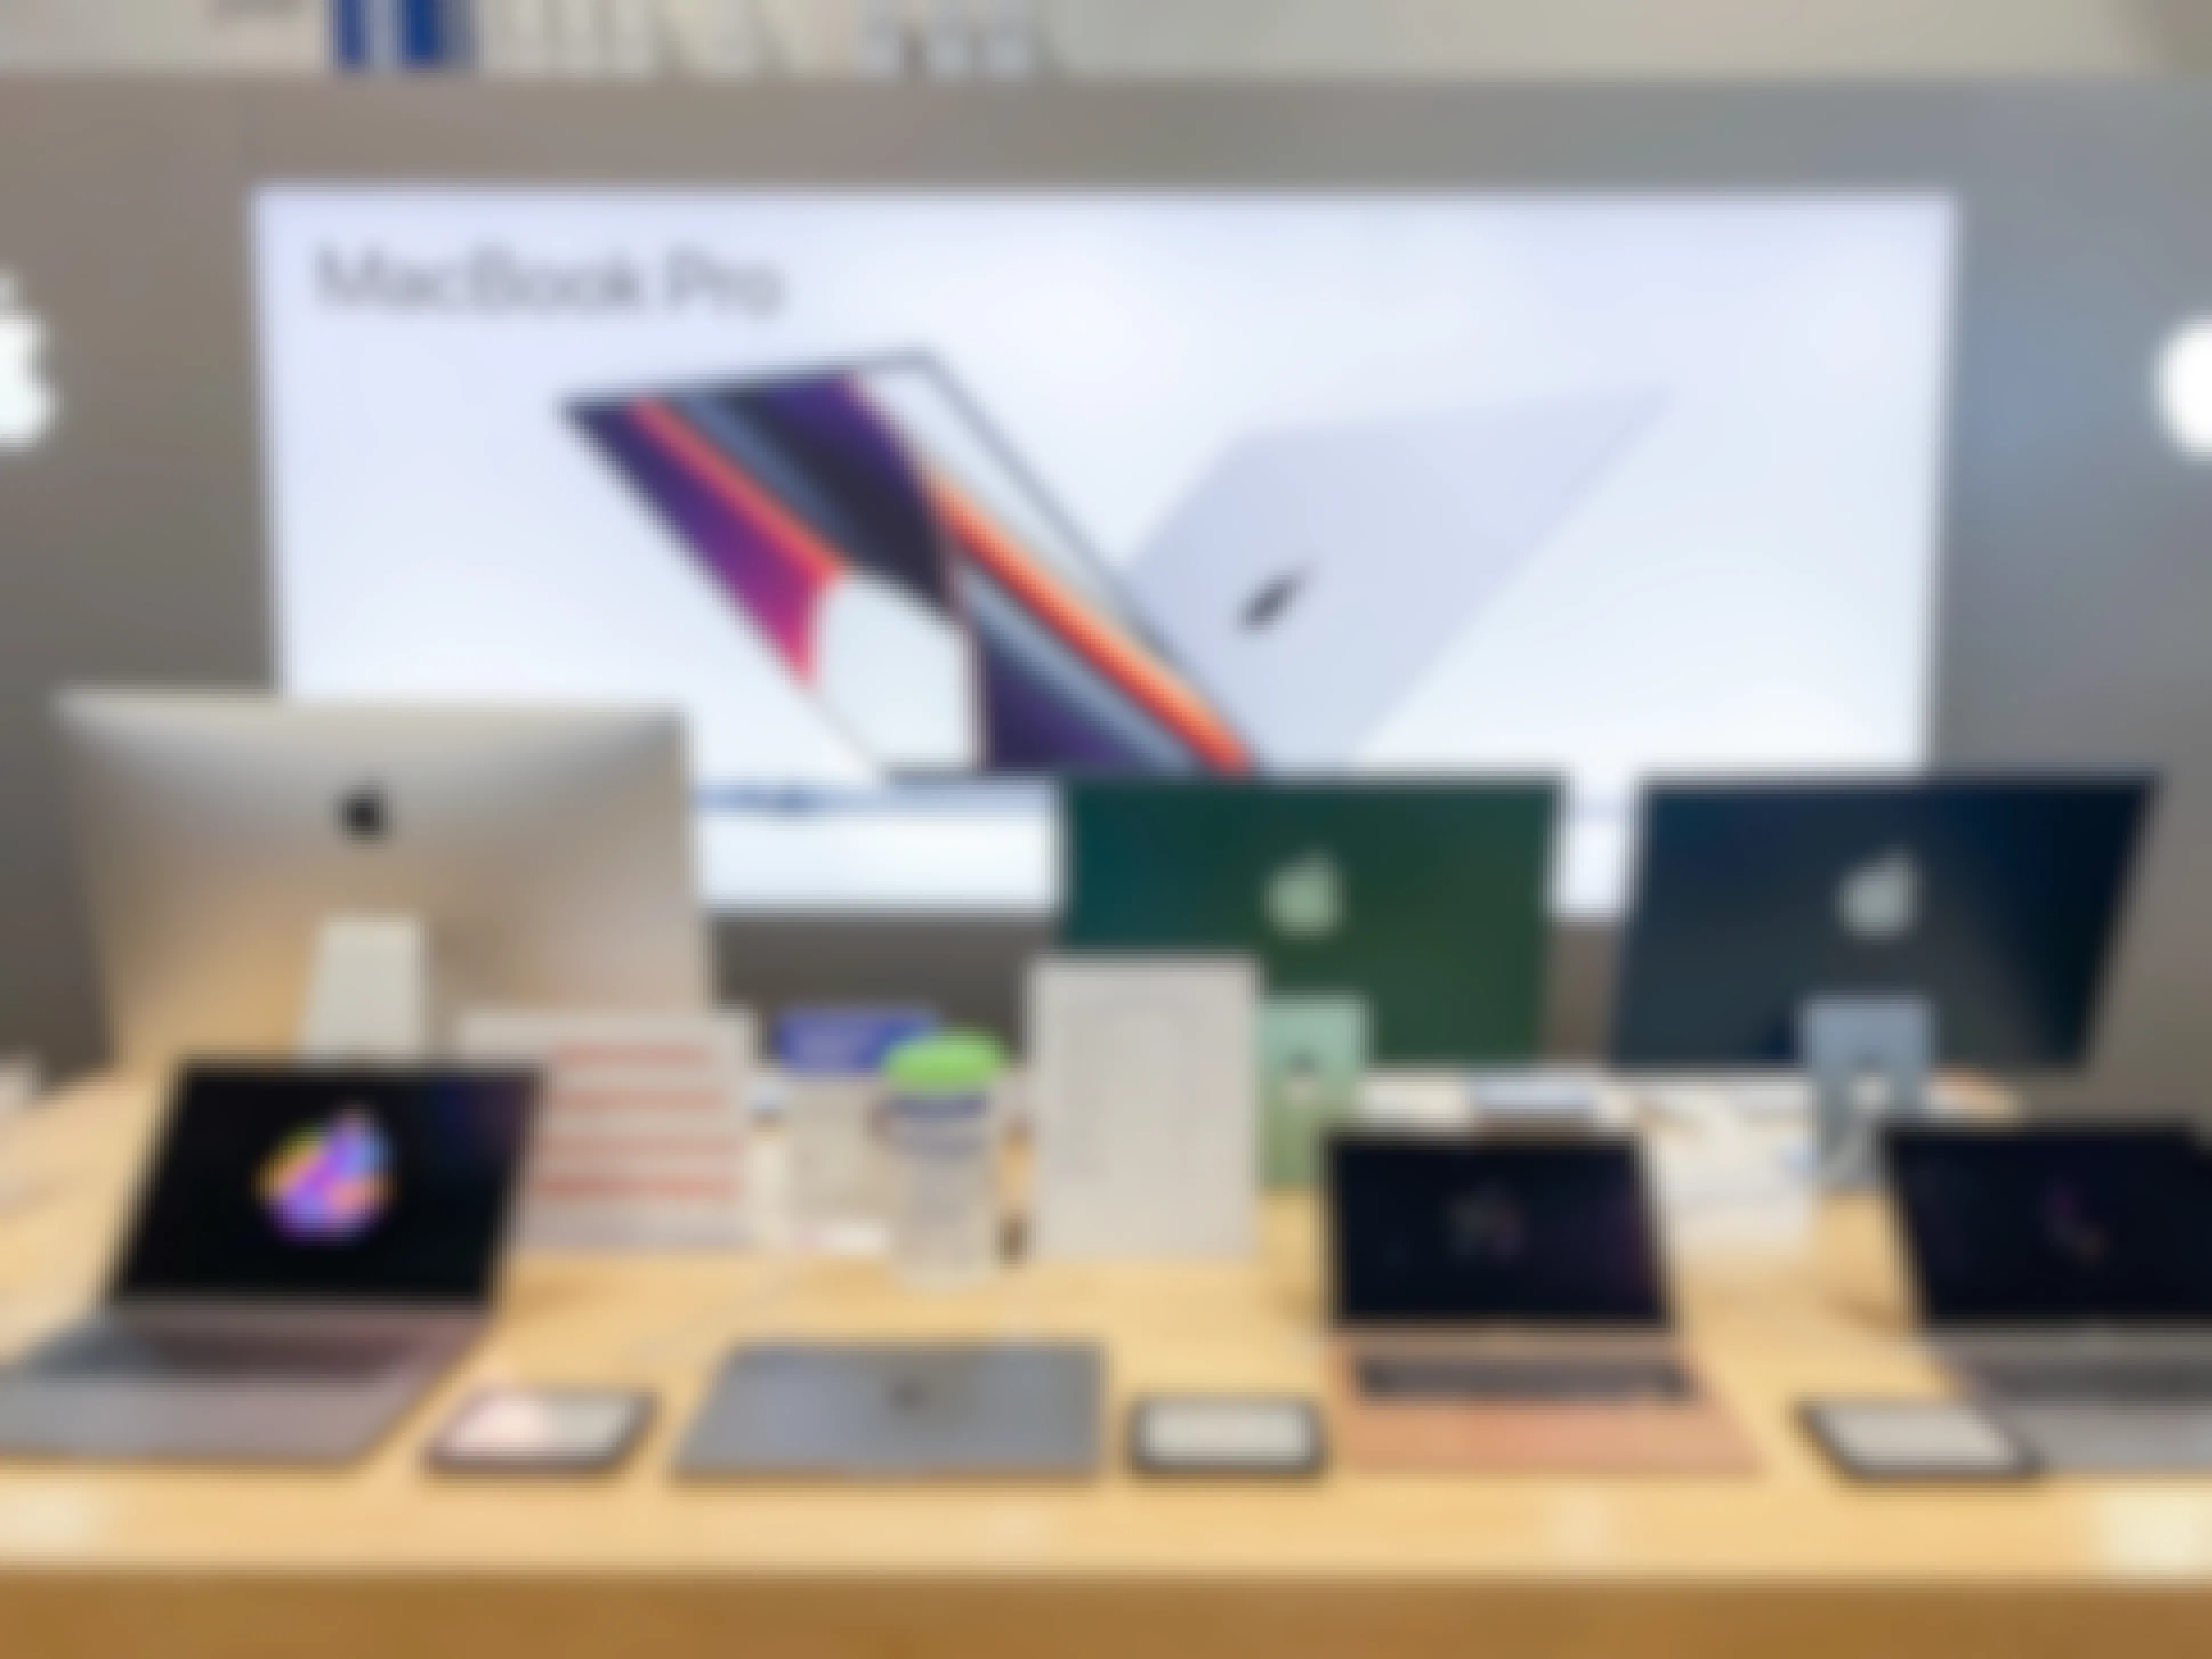 macbook pro signage and laptops on display in store 